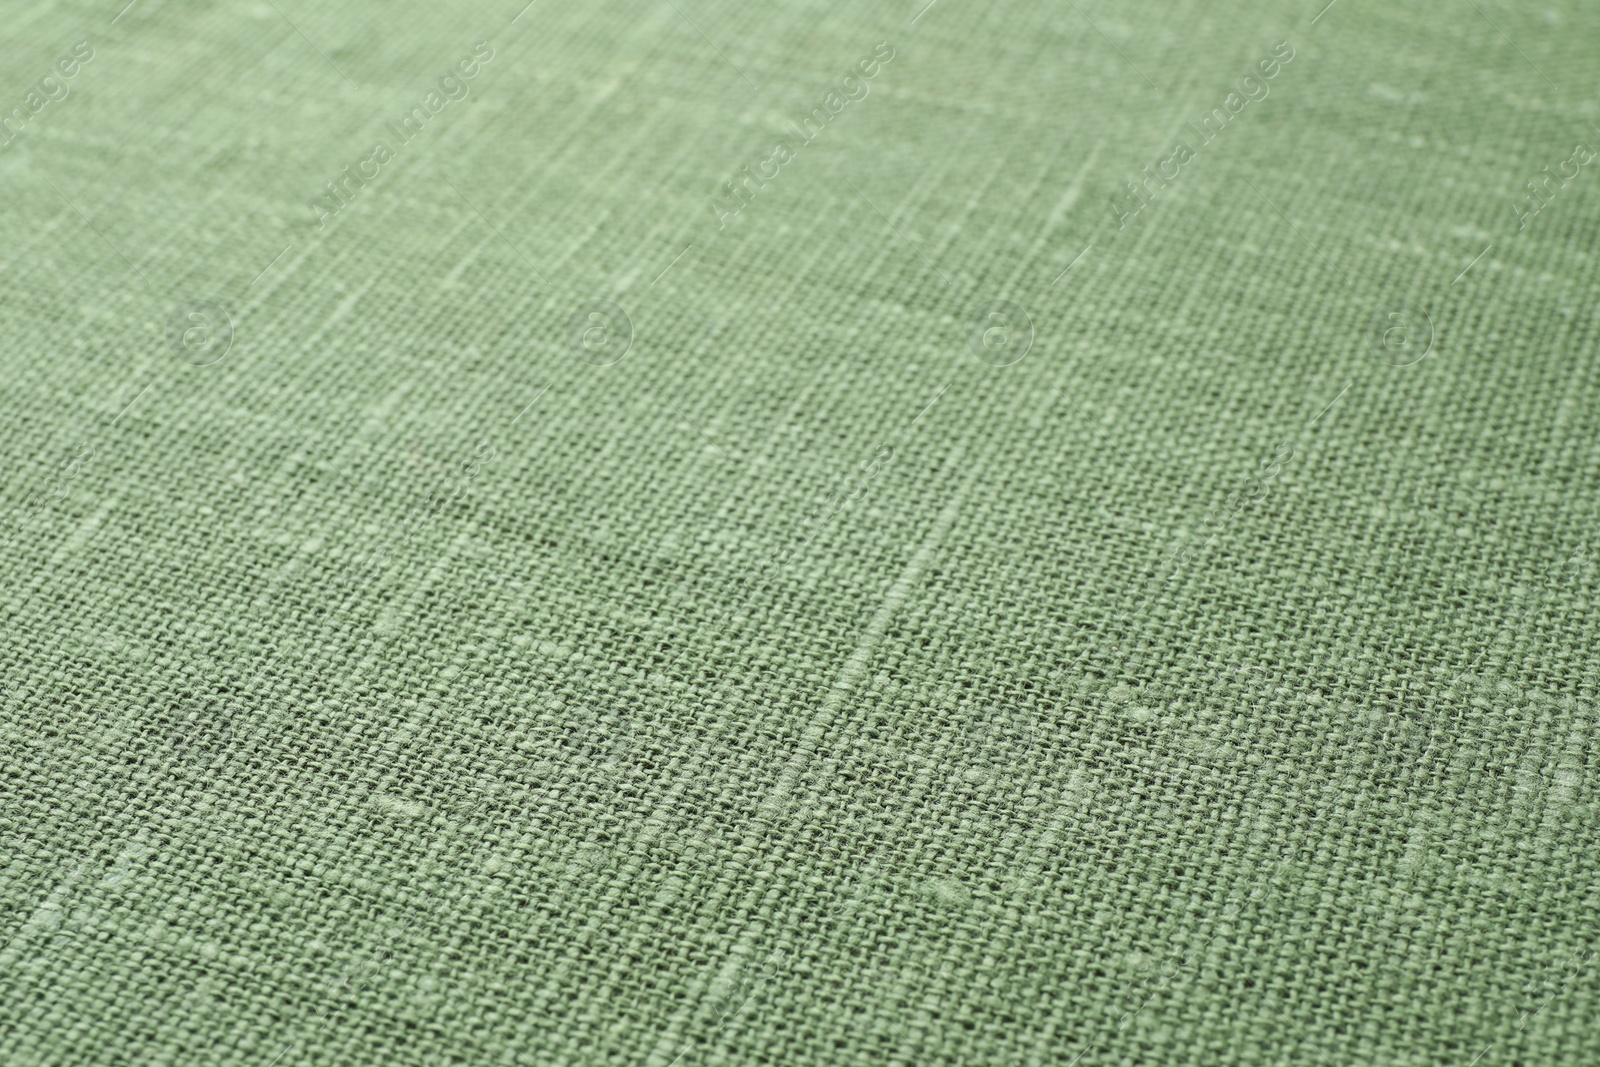 Photo of Texture of green fabric as background, closeup